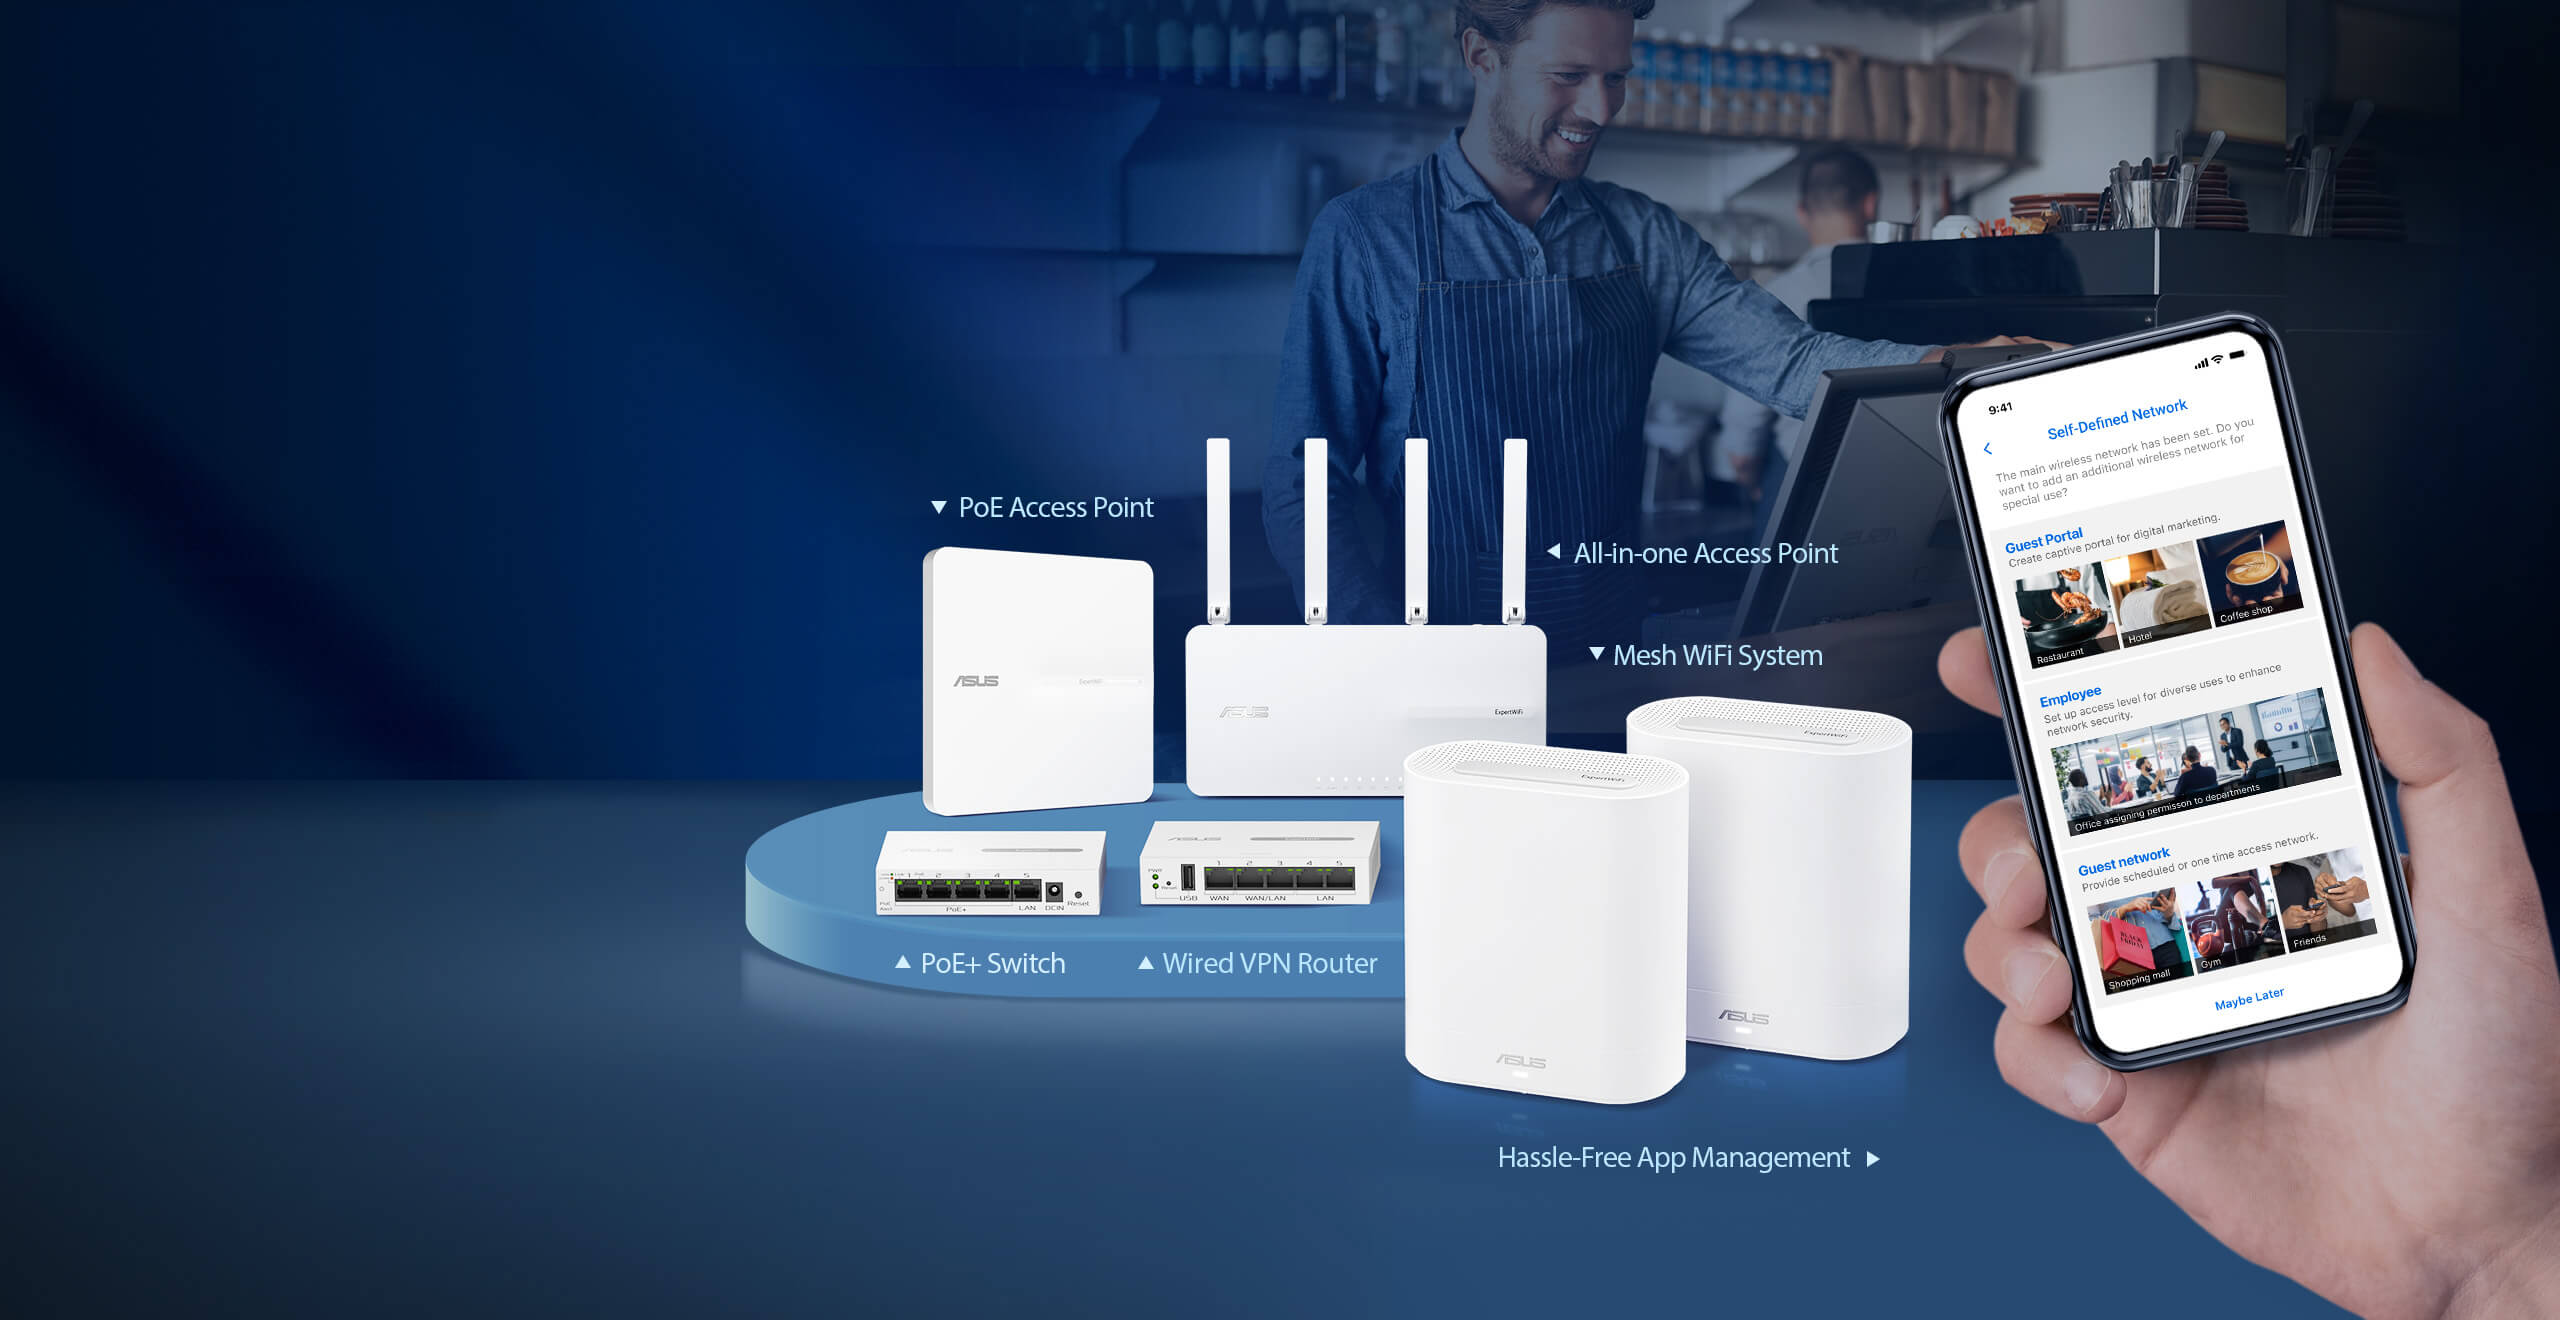 The ExpertWiFi product lineup in a café setting, with a hand holding a phone showing the ExpertWiFi SDN feature UI. From left to right in the back: EBG19P PoE AP, EBR63 all-in-one AP. Front: EBG19P PoE+ switch, EBG19P wired VPN router, and two packs of EBM68 mesh system.